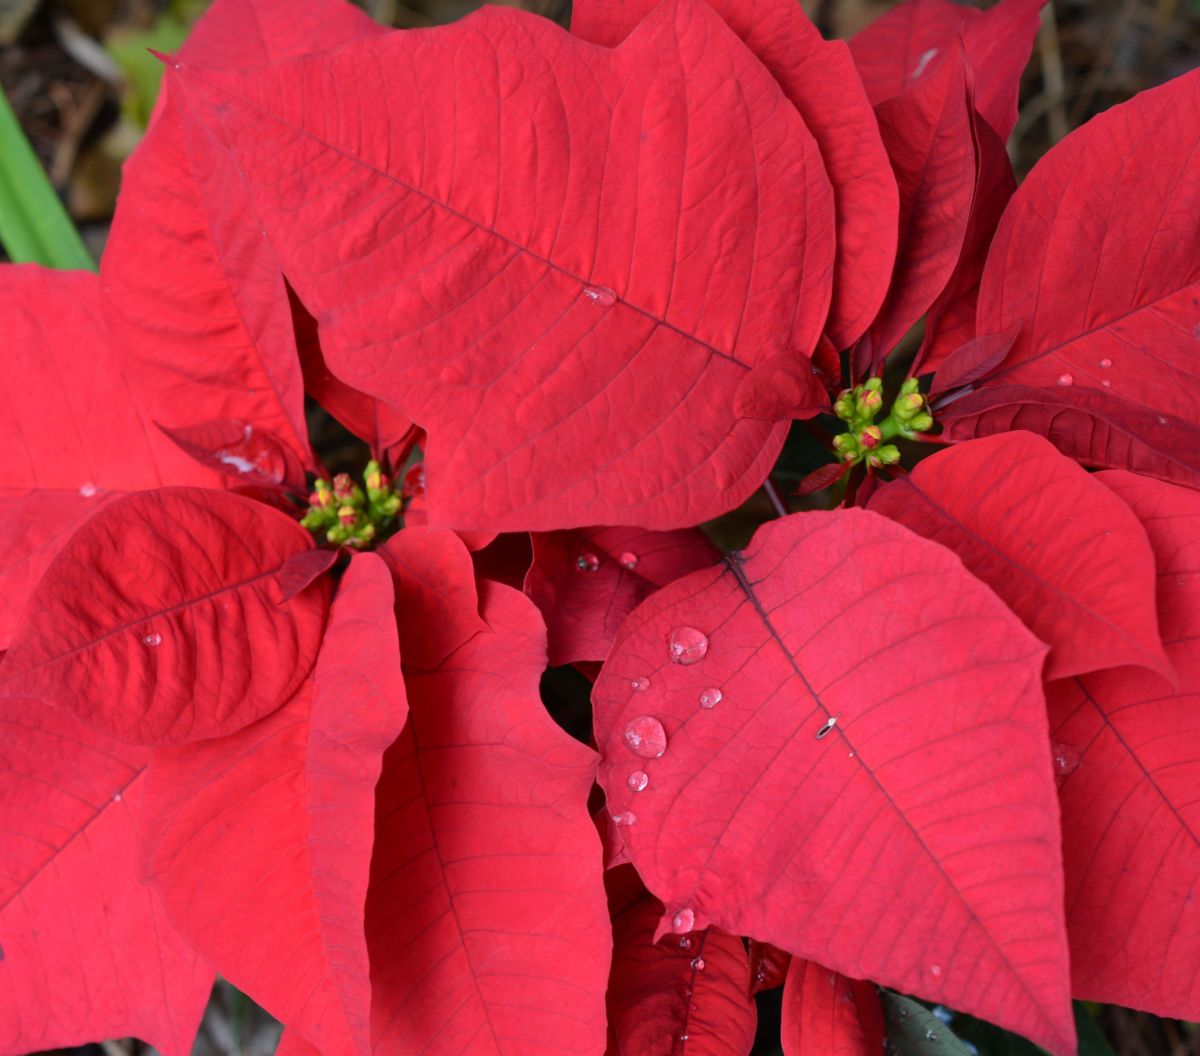 The traditional bright “Christmas red” poinsettia